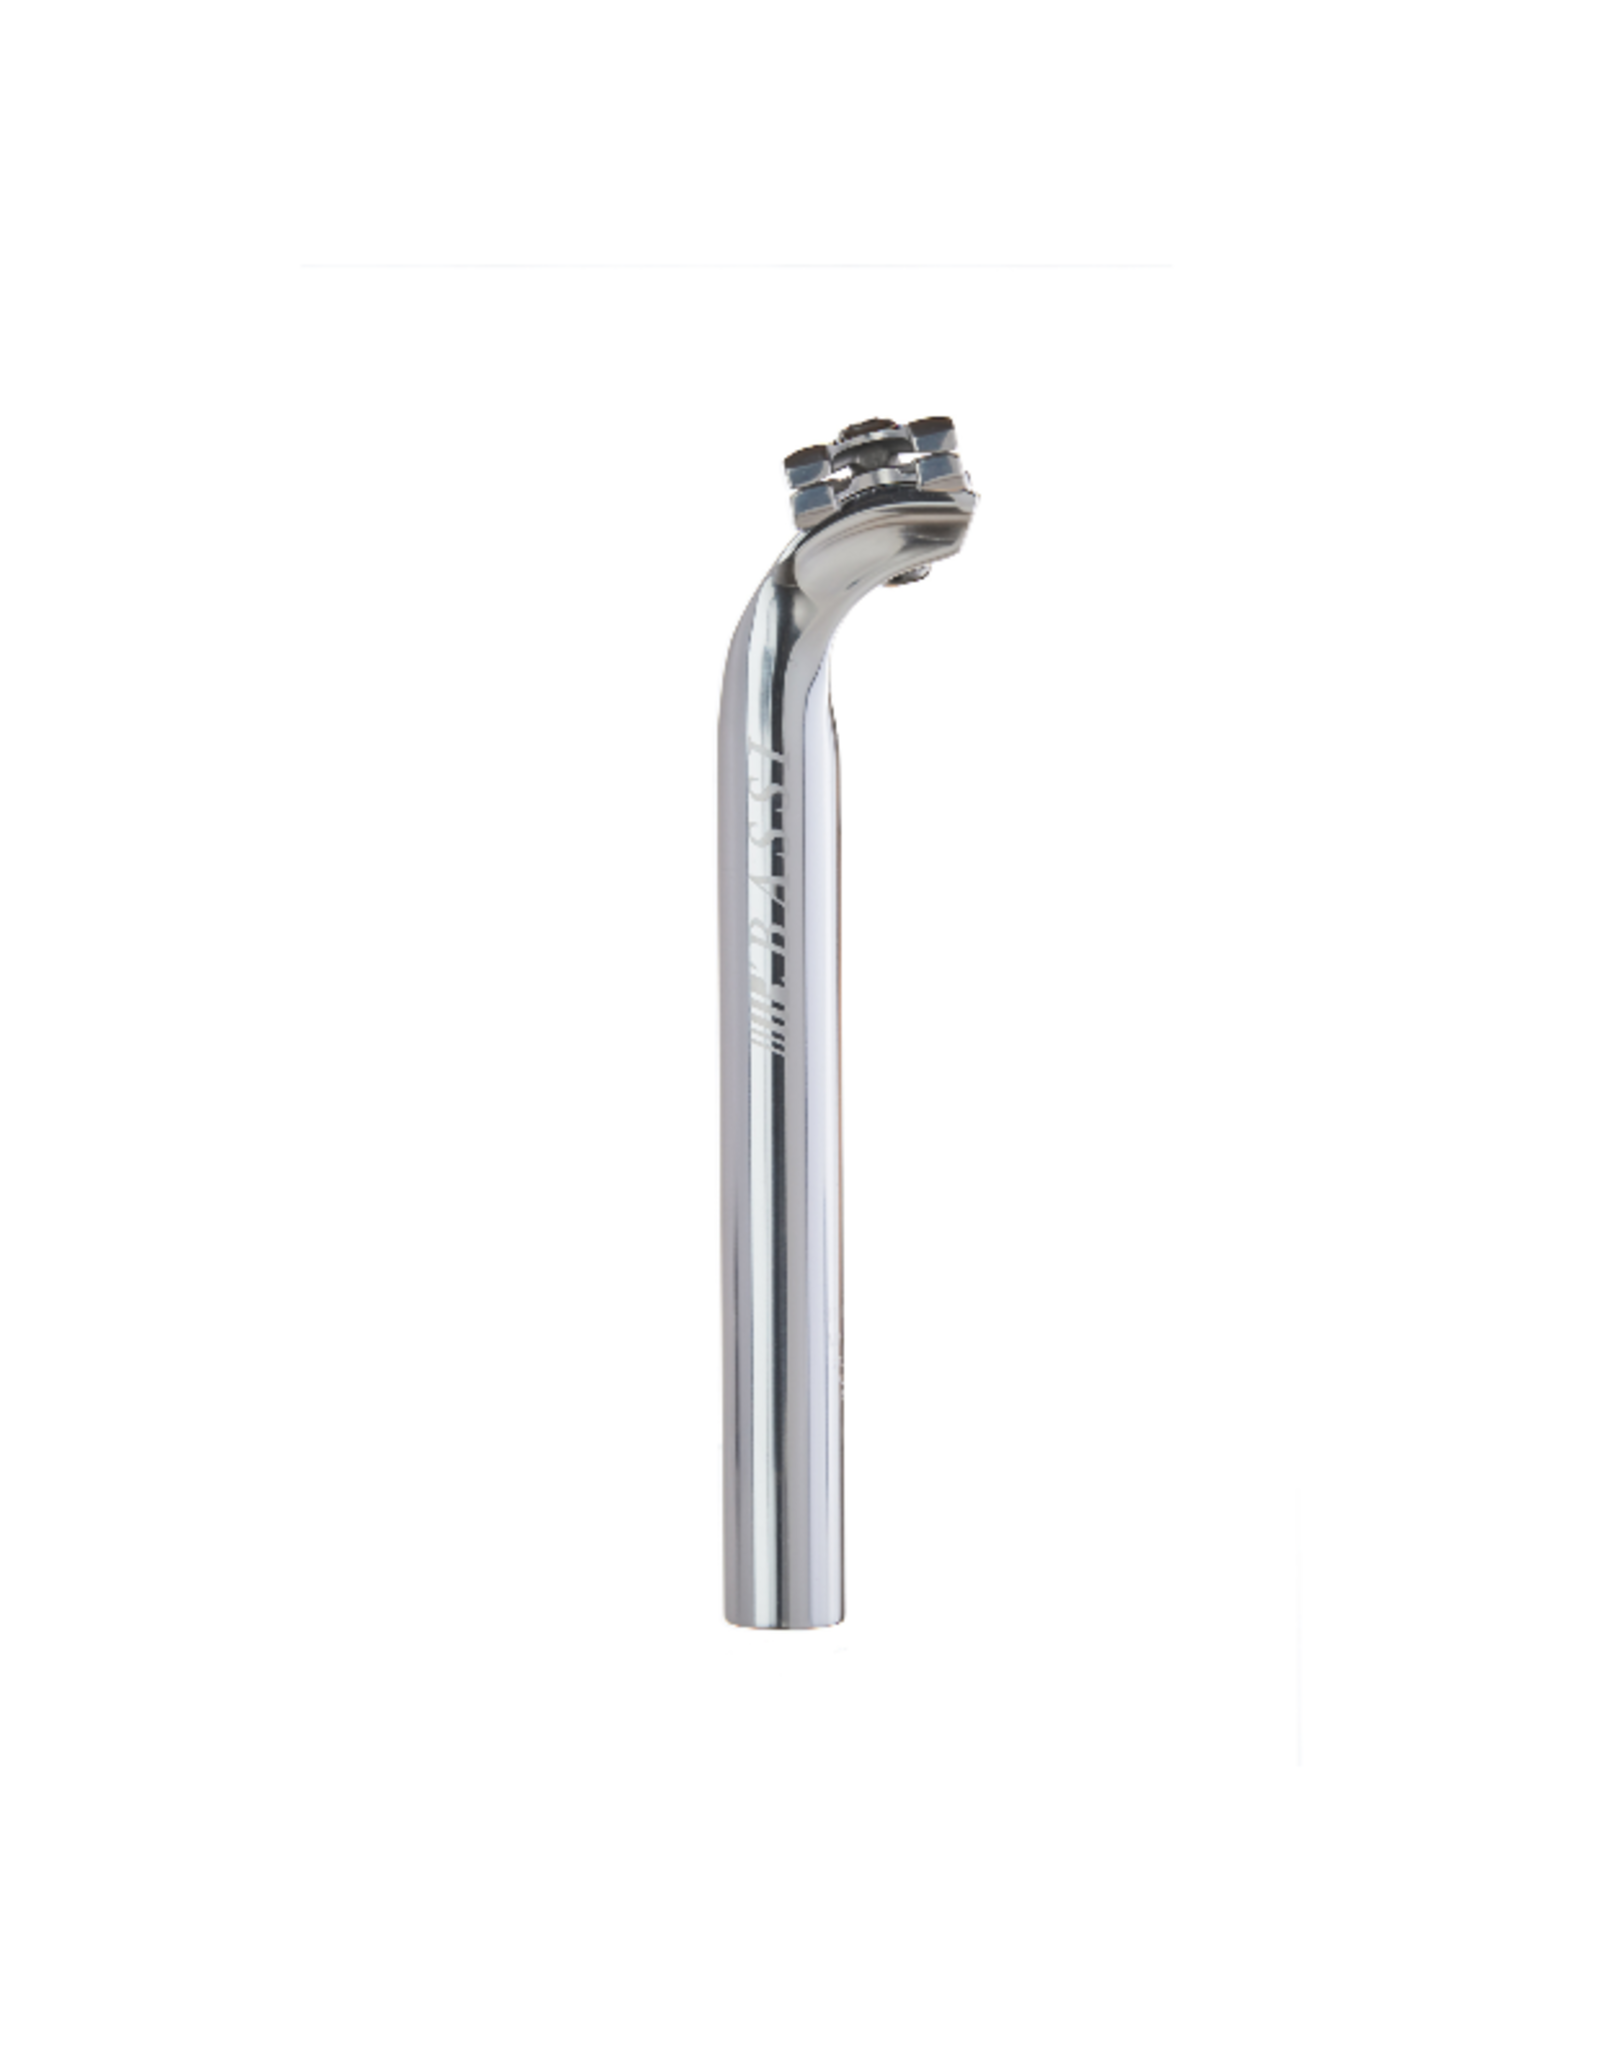 Bassi Bassi Forged Alloy Seatpost